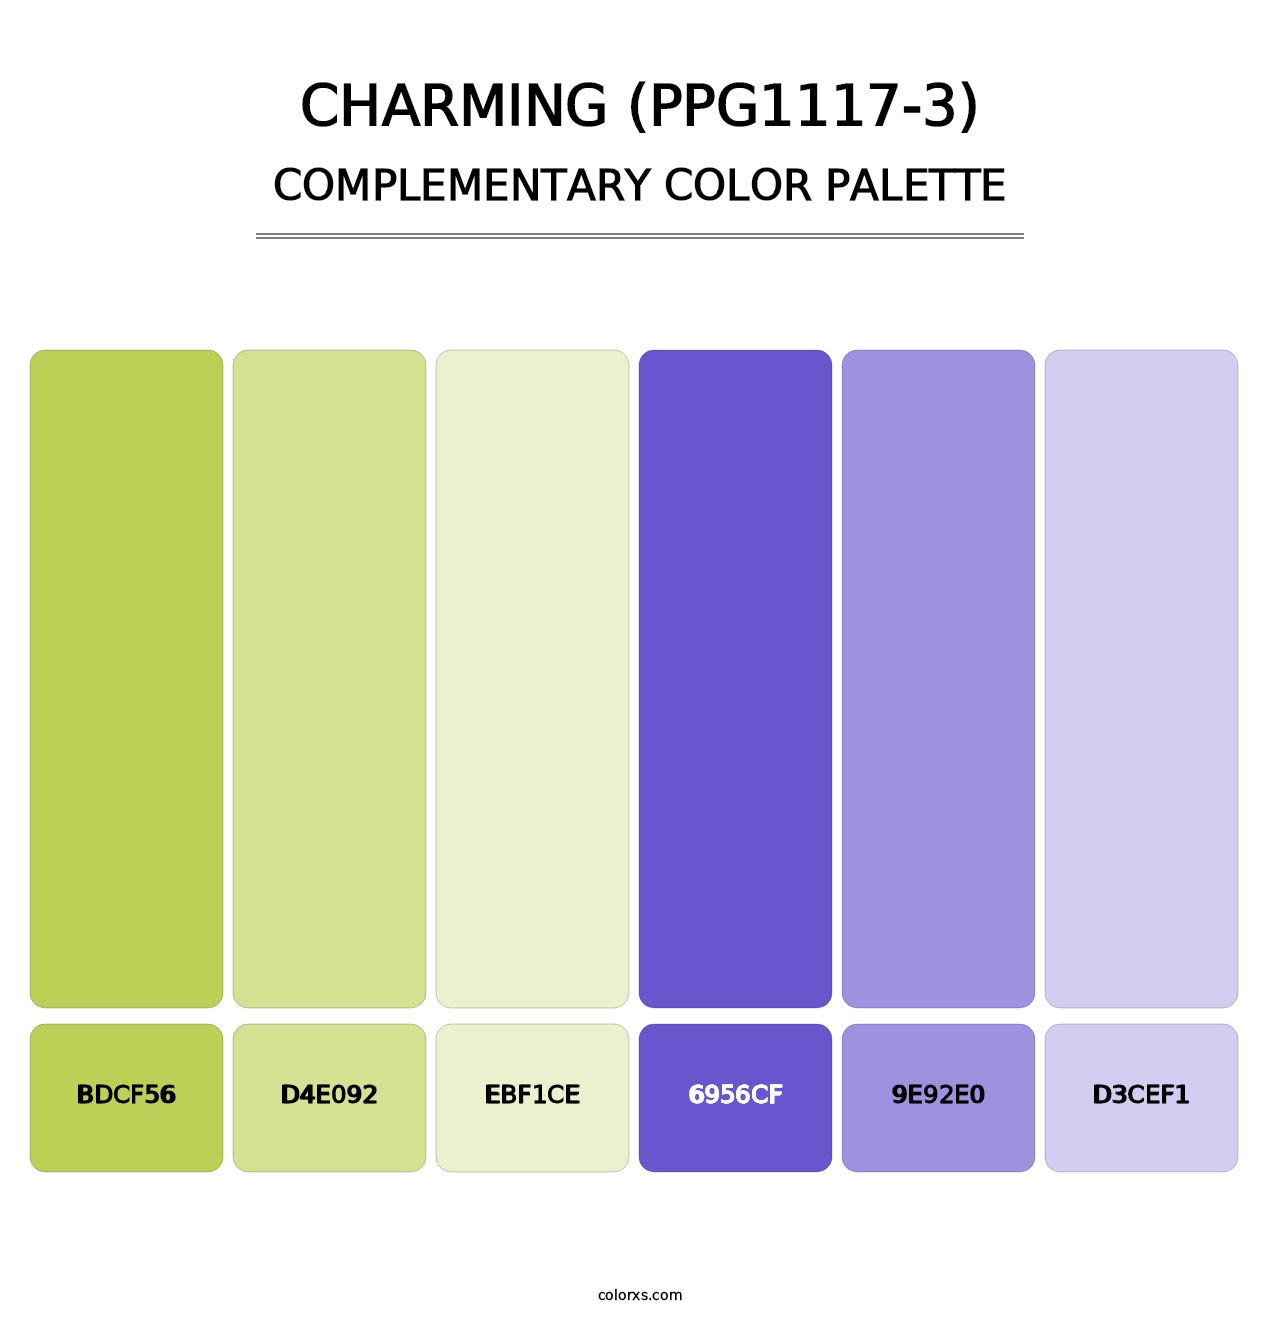 Charming (PPG1117-3) - Complementary Color Palette